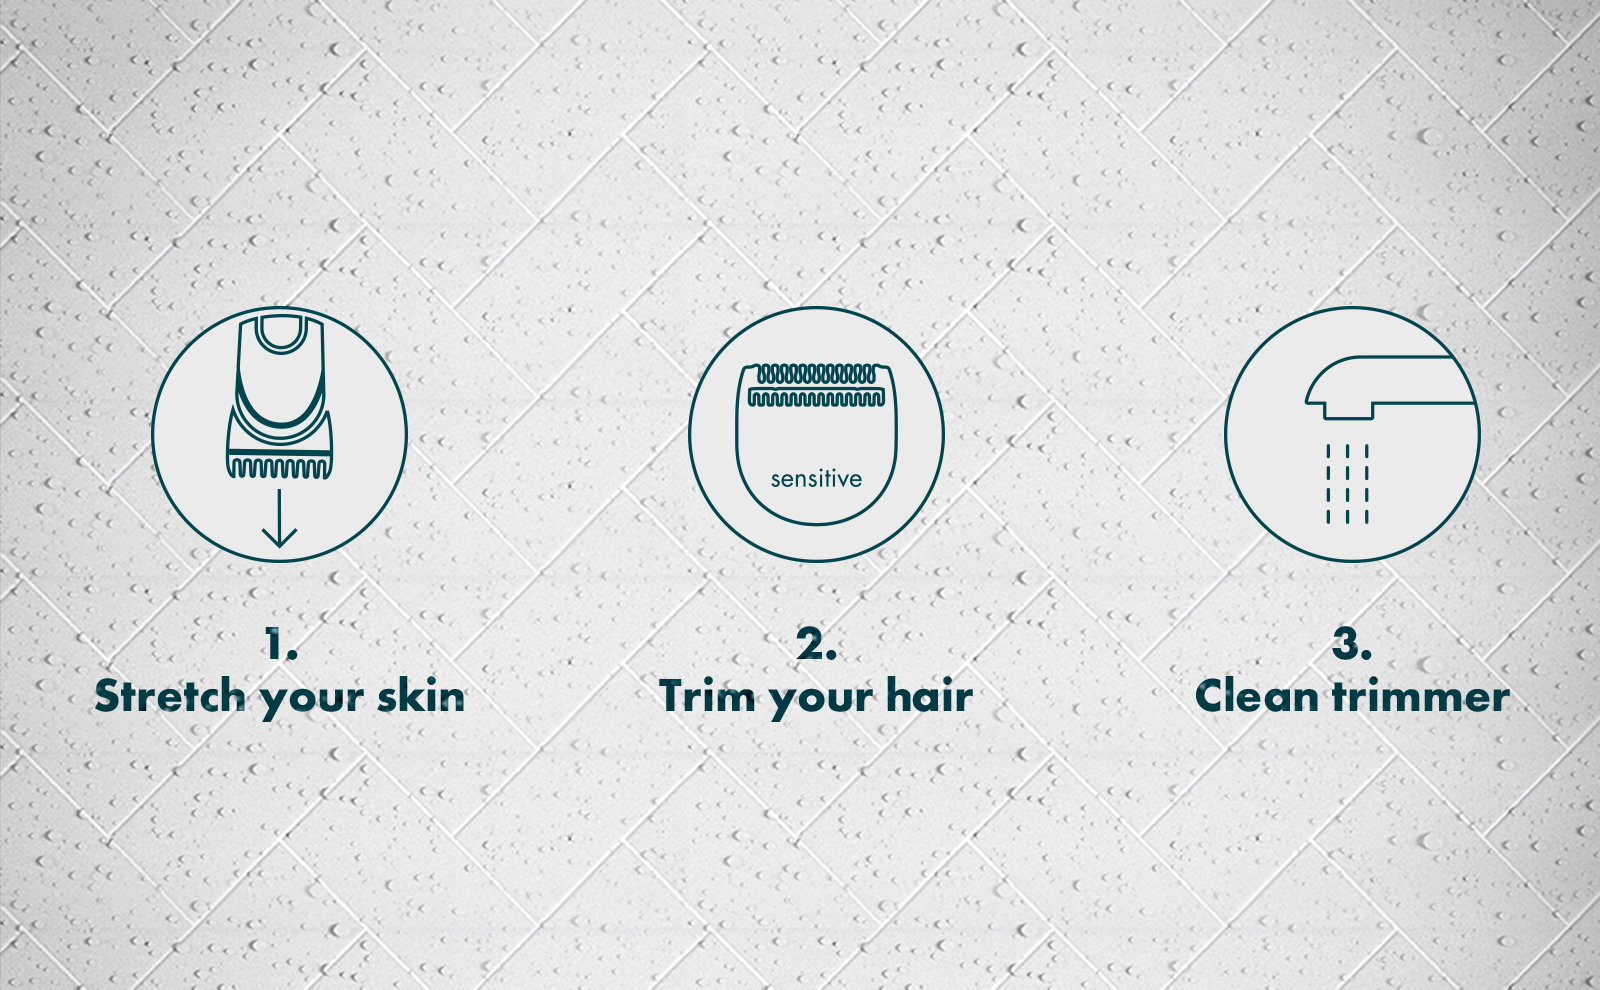 1. Stretch your skin. 2. Trim your hair. 3. Clean trimmer.